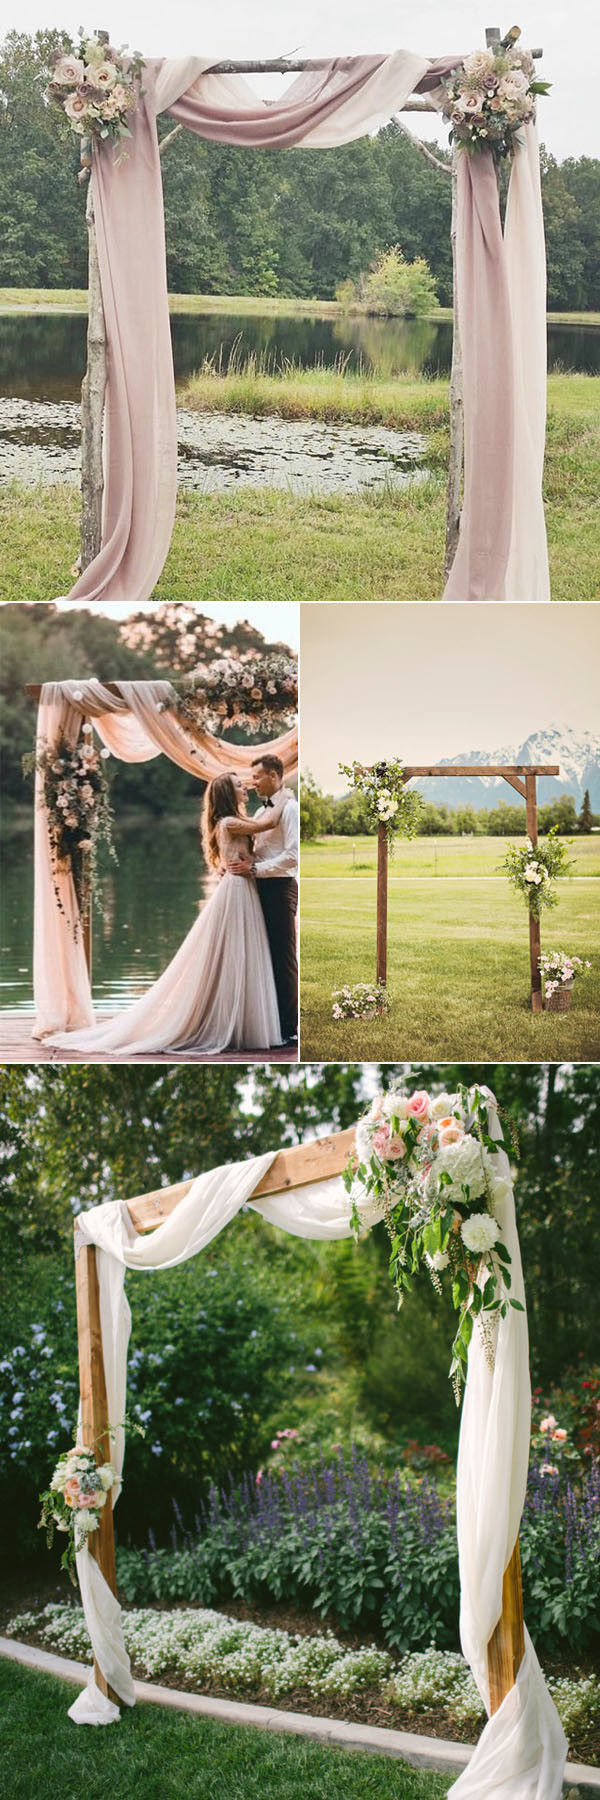 Decorated Wedding Arches
 32 Rustic Wedding Decoration Ideas to Inspire Your Big Day